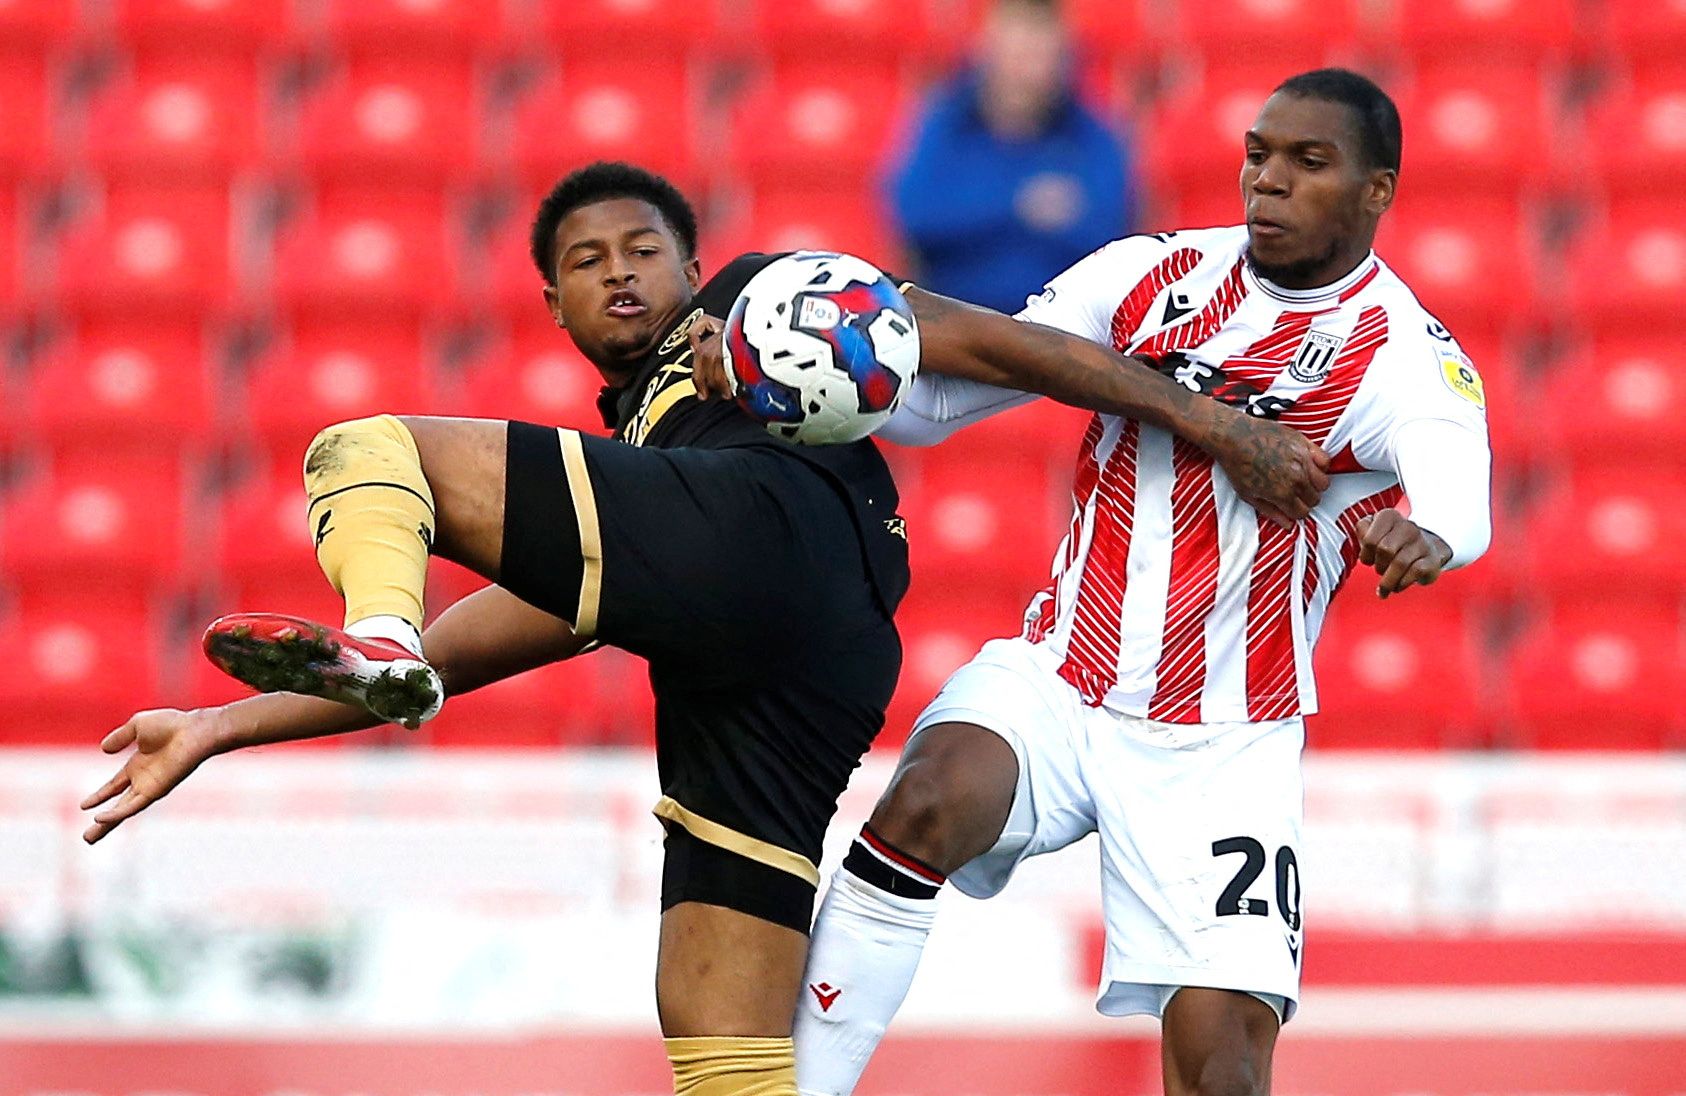 Soccer Football - Championship - Stoke City v Sheffield United - bet365 Stadium, Stoke-on-Trent, Britain - October 8, 2022 Sheffield United's Rhian Brewster in action with Stoke City's Dujon Sterling   Action Images/Craig Brough  EDITORIAL USE ONLY. No use with unauthorized audio, video, data, fixture lists, club/league logos or 